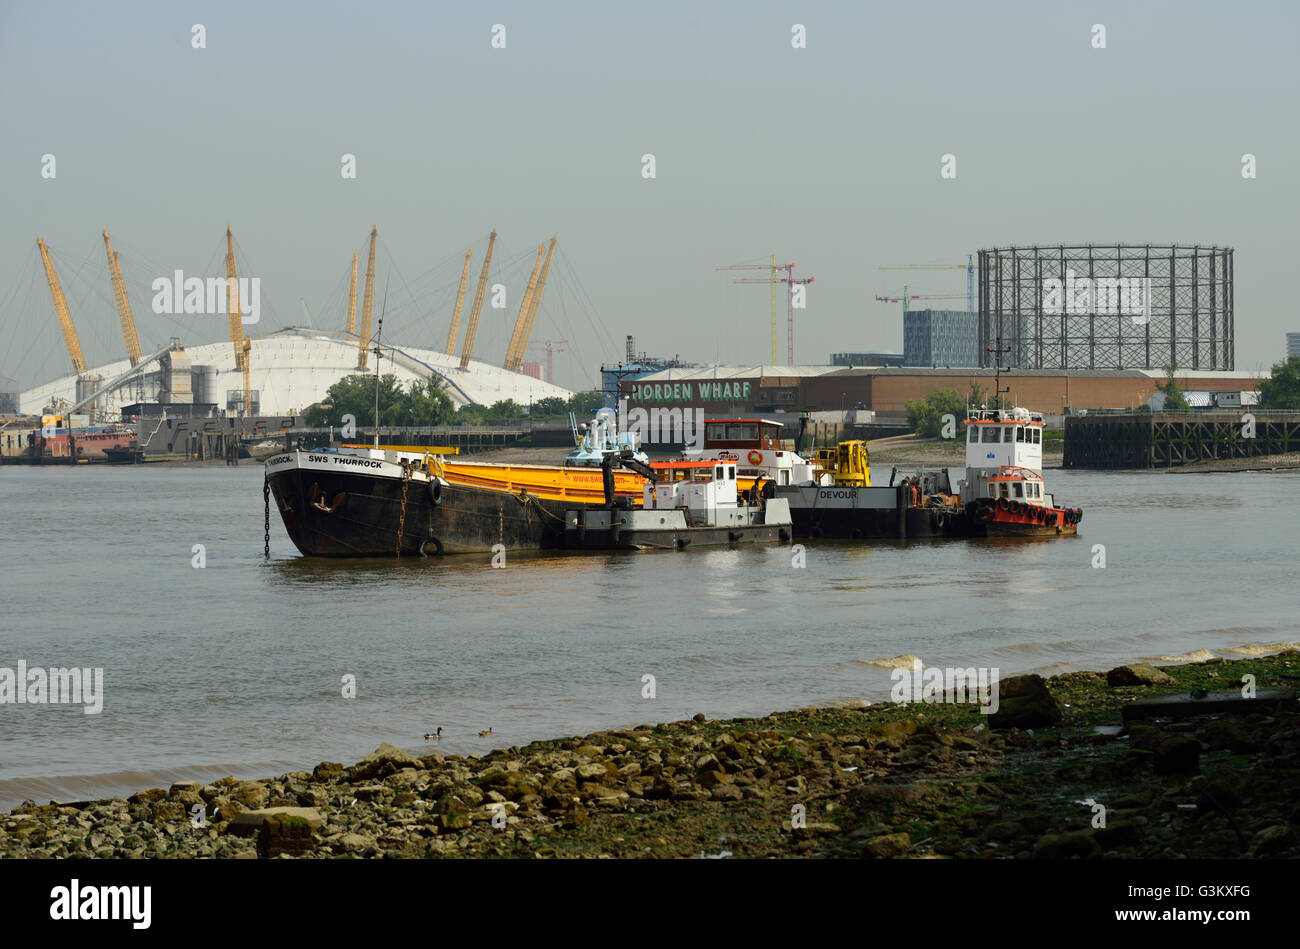 Working River Thames, O2 Arena Millennium Dome, Greenwich, East London, United Kingdom Stock Photo